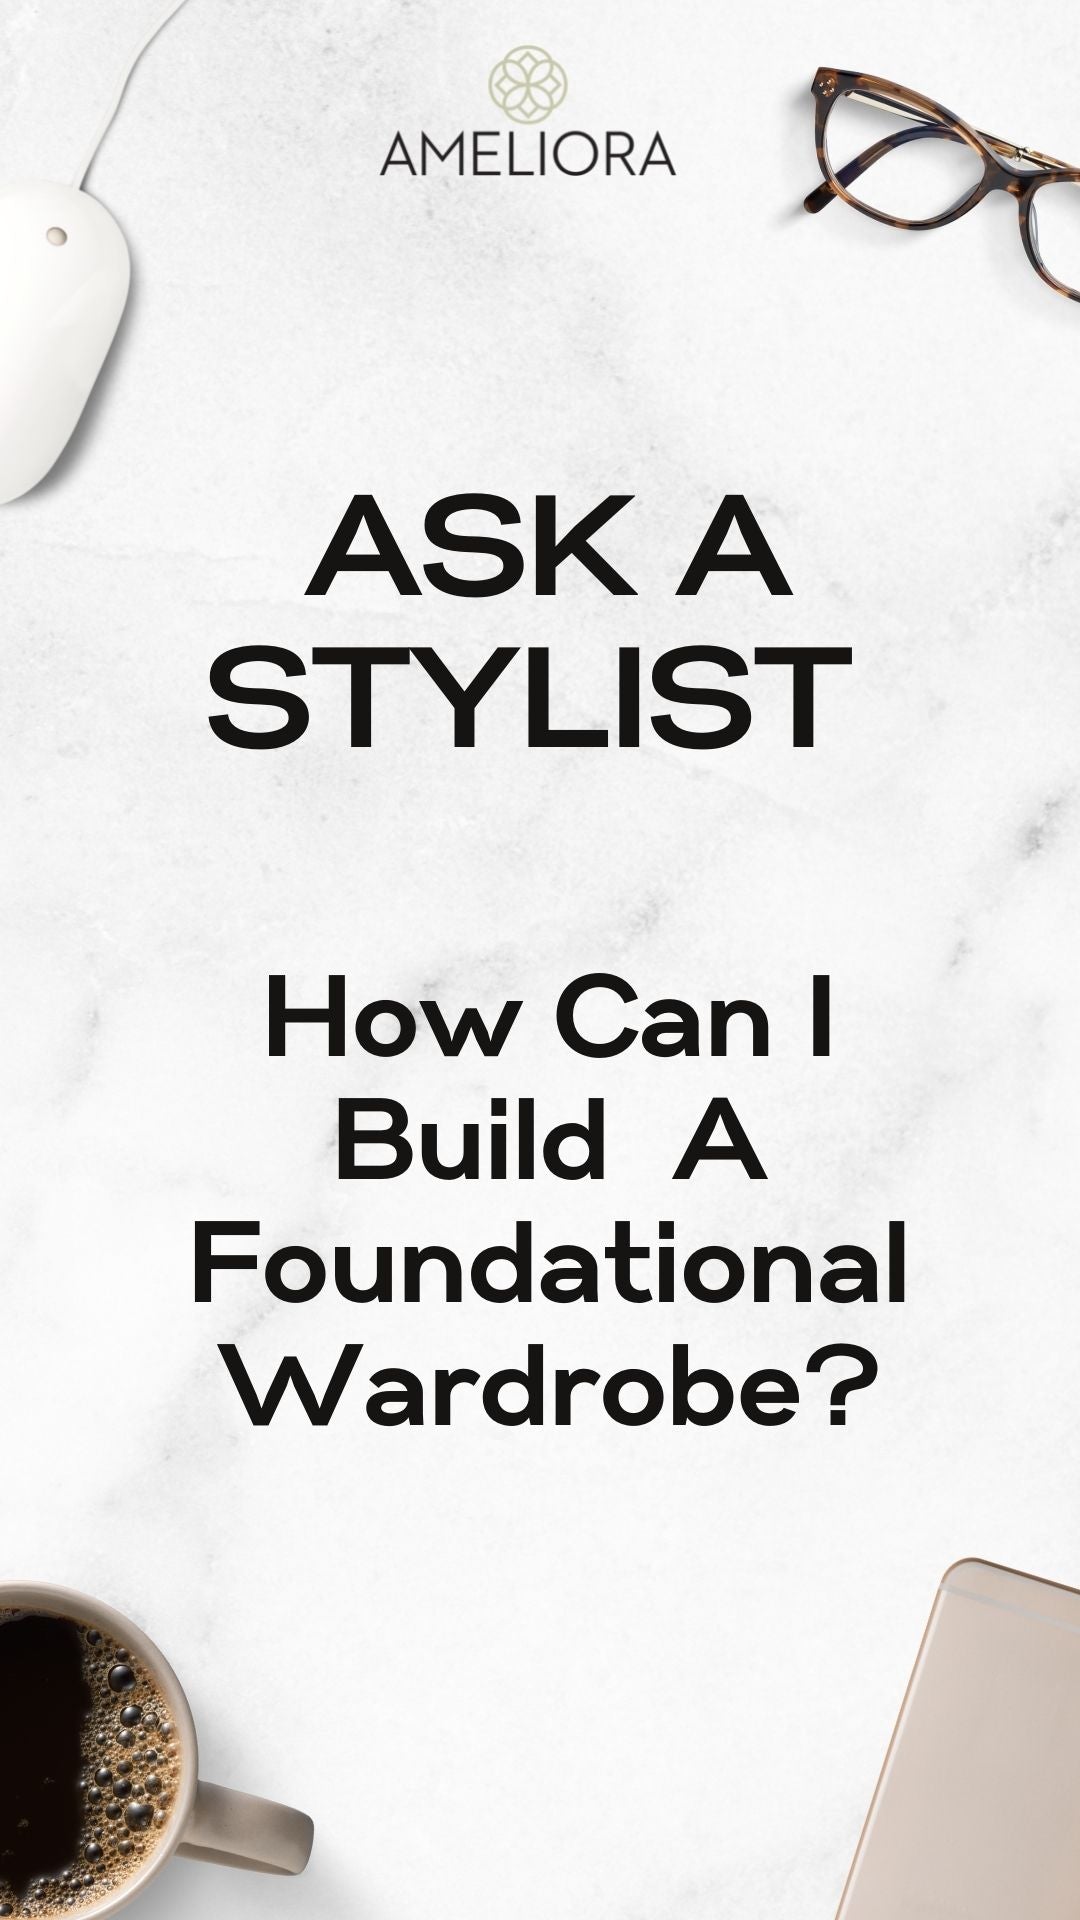 How Can I Build A Foundational Wardrobe?